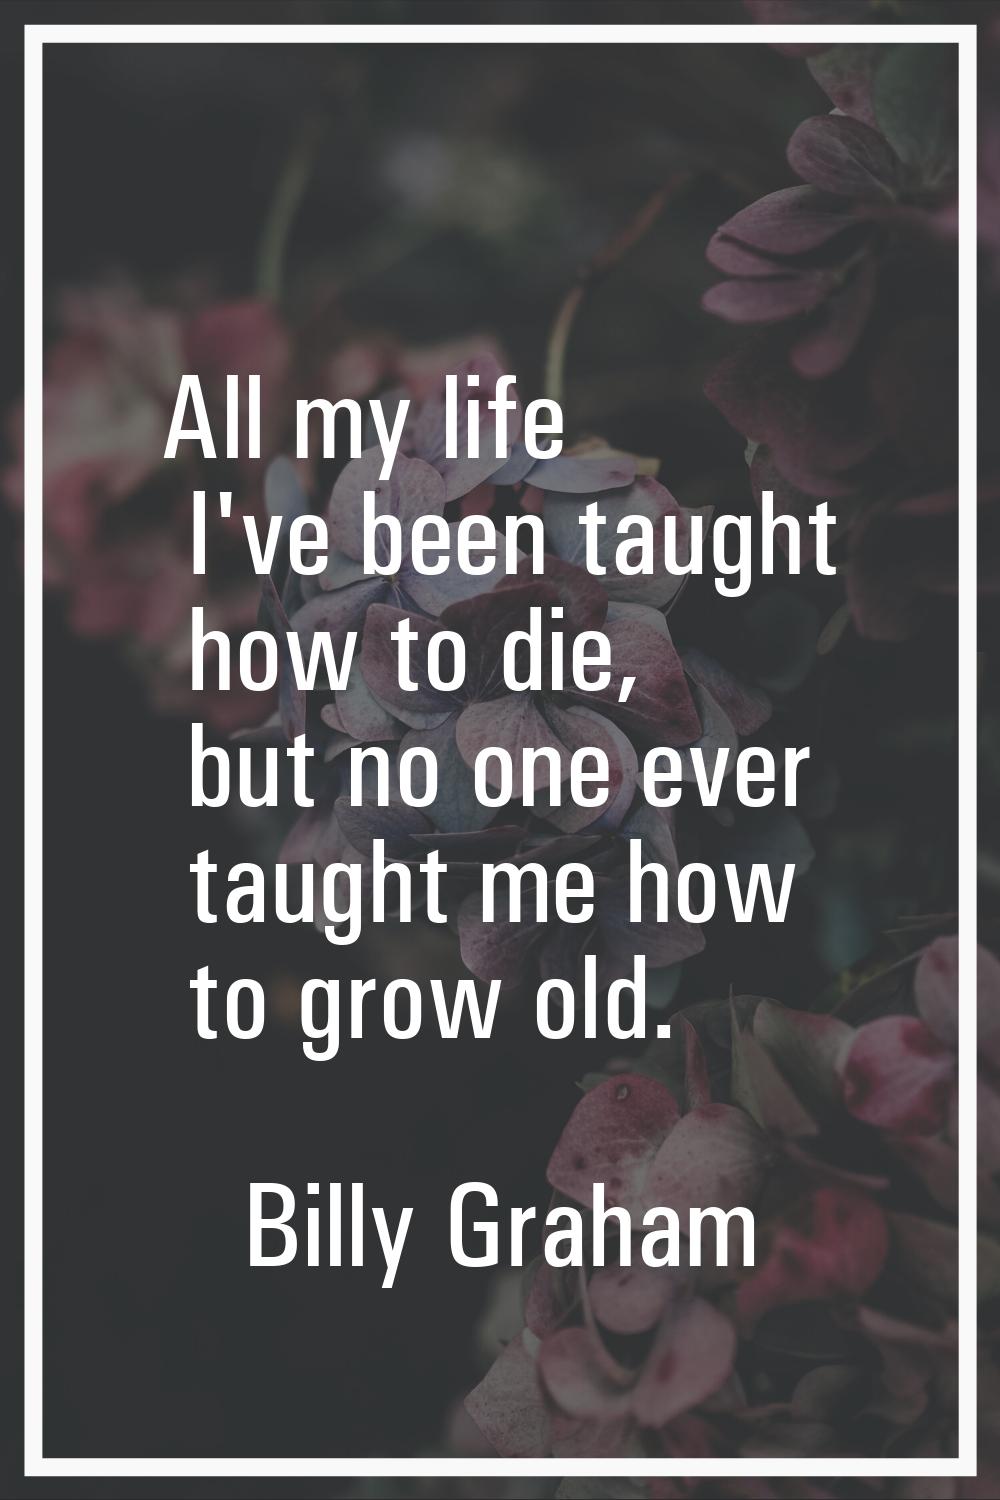 All my life I've been taught how to die, but no one ever taught me how to grow old.